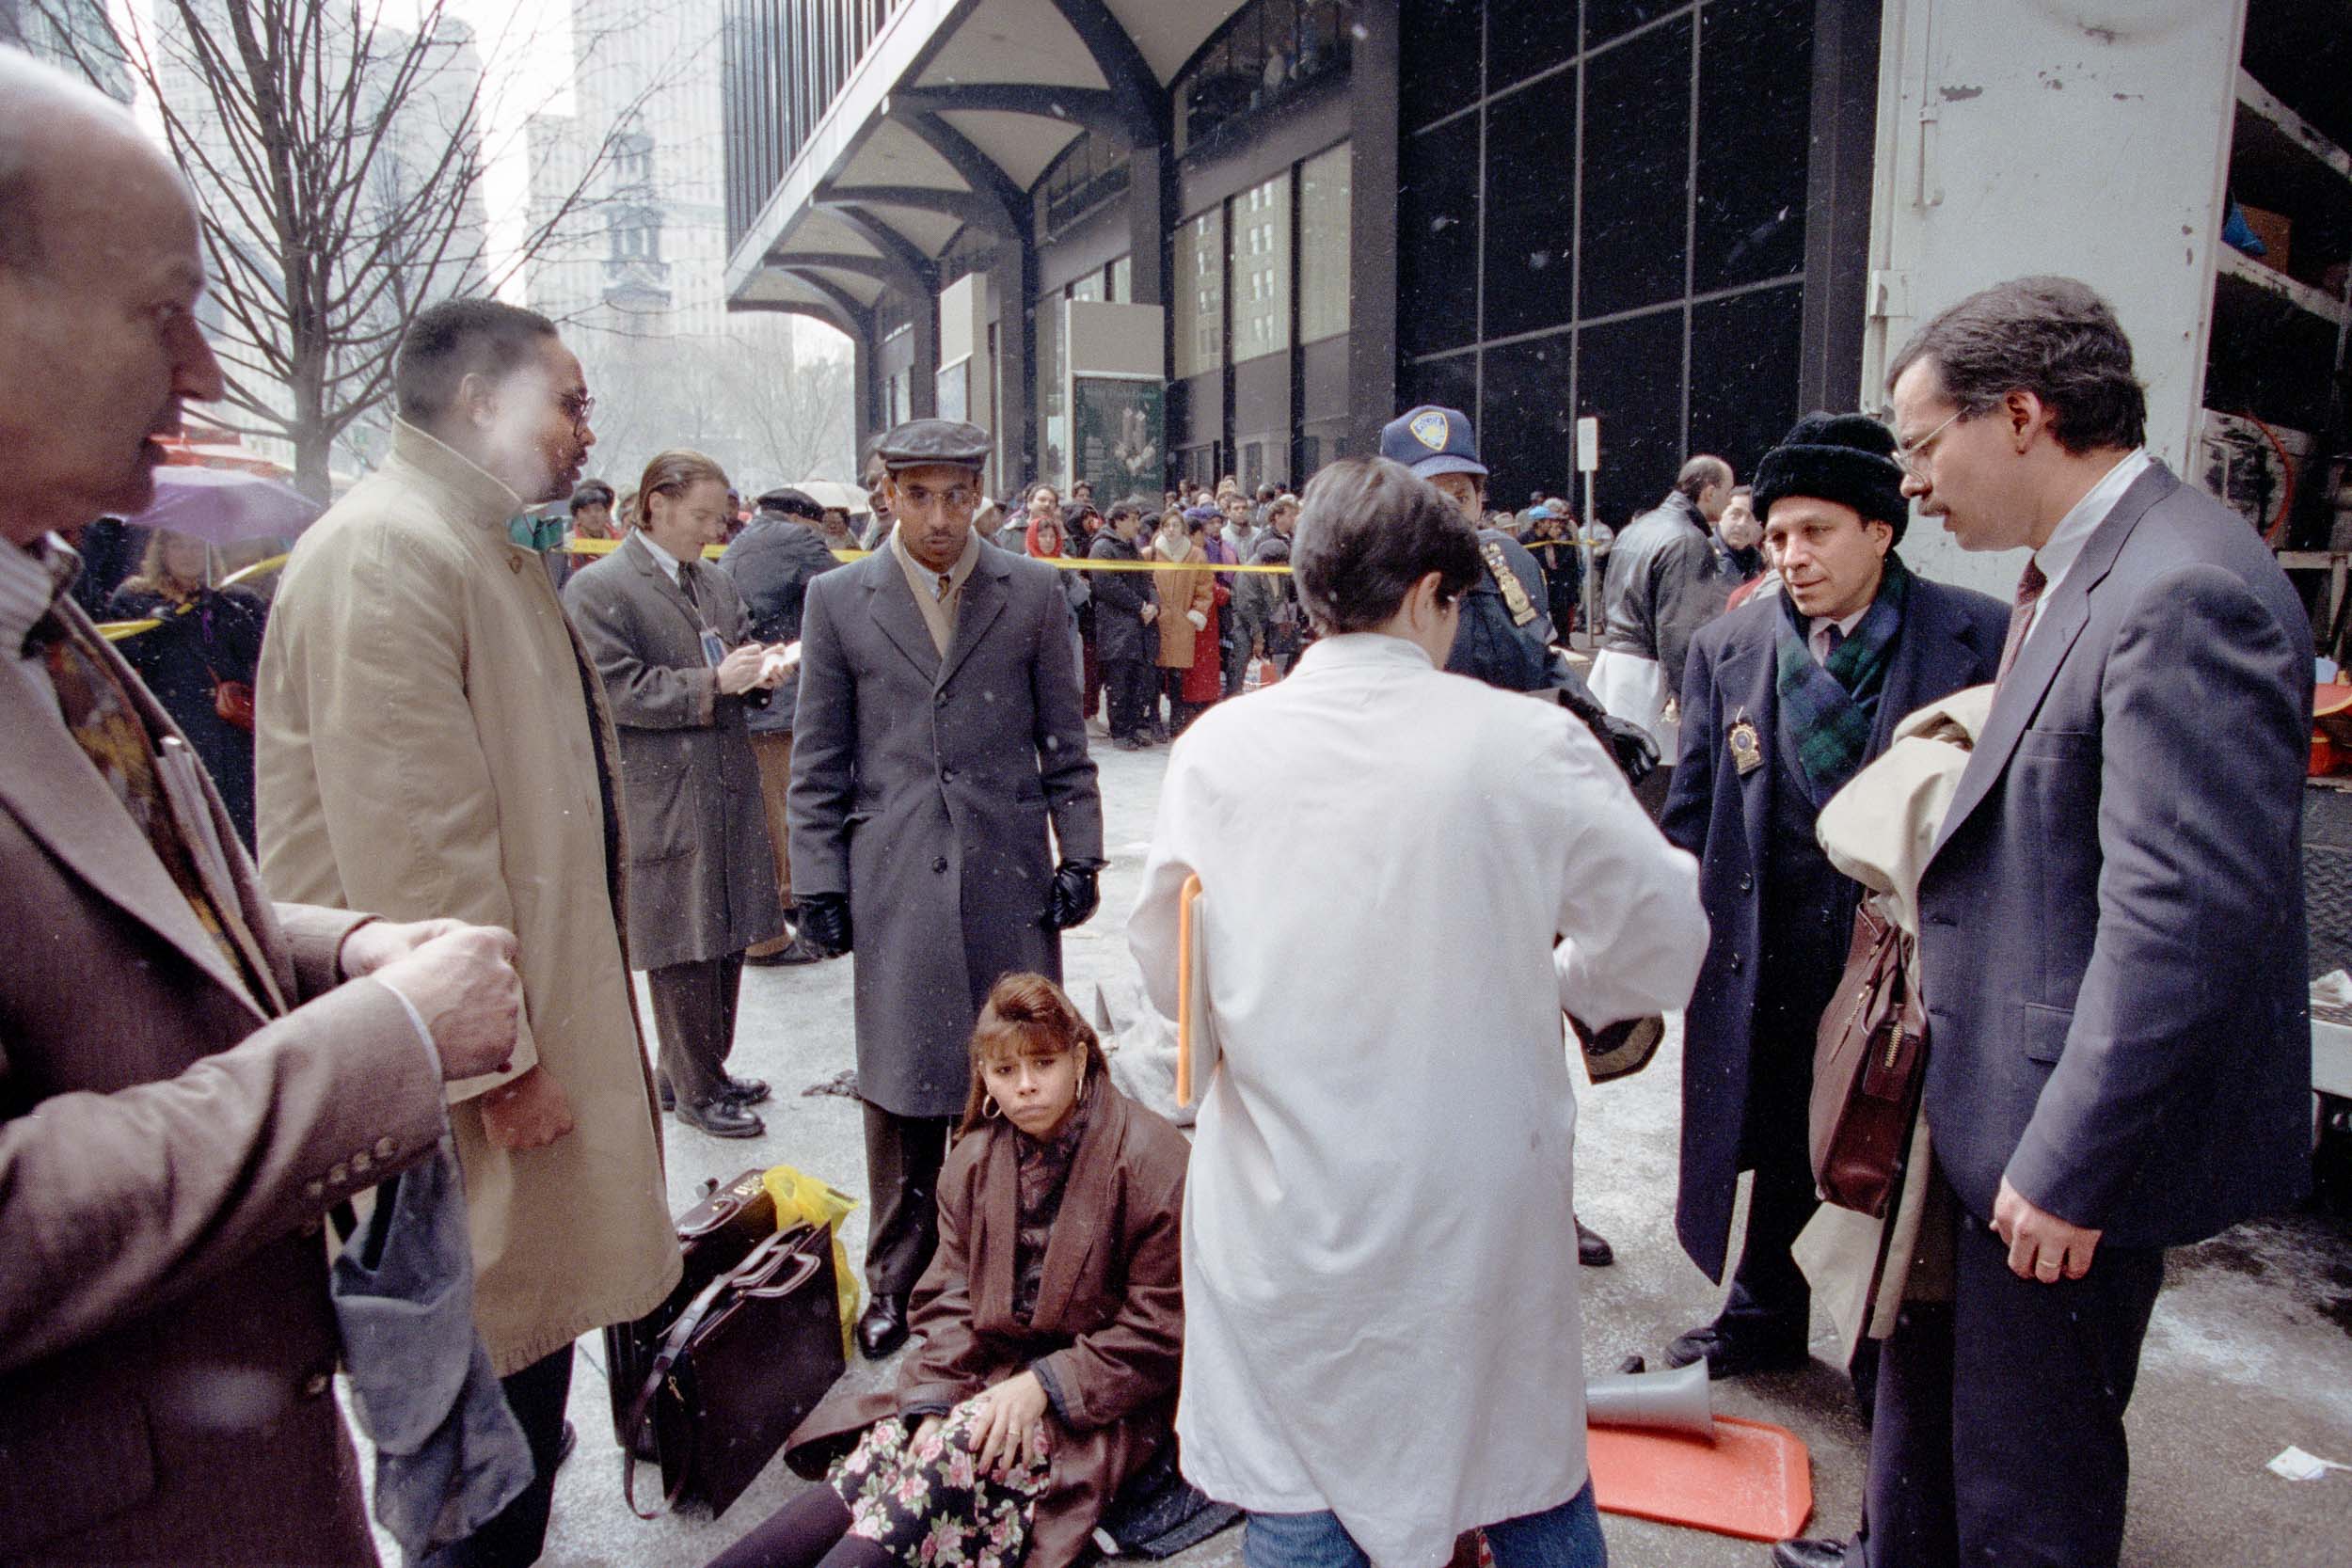 Office workers seeking medical treatment outside of the World Trade Center, NY, 1993